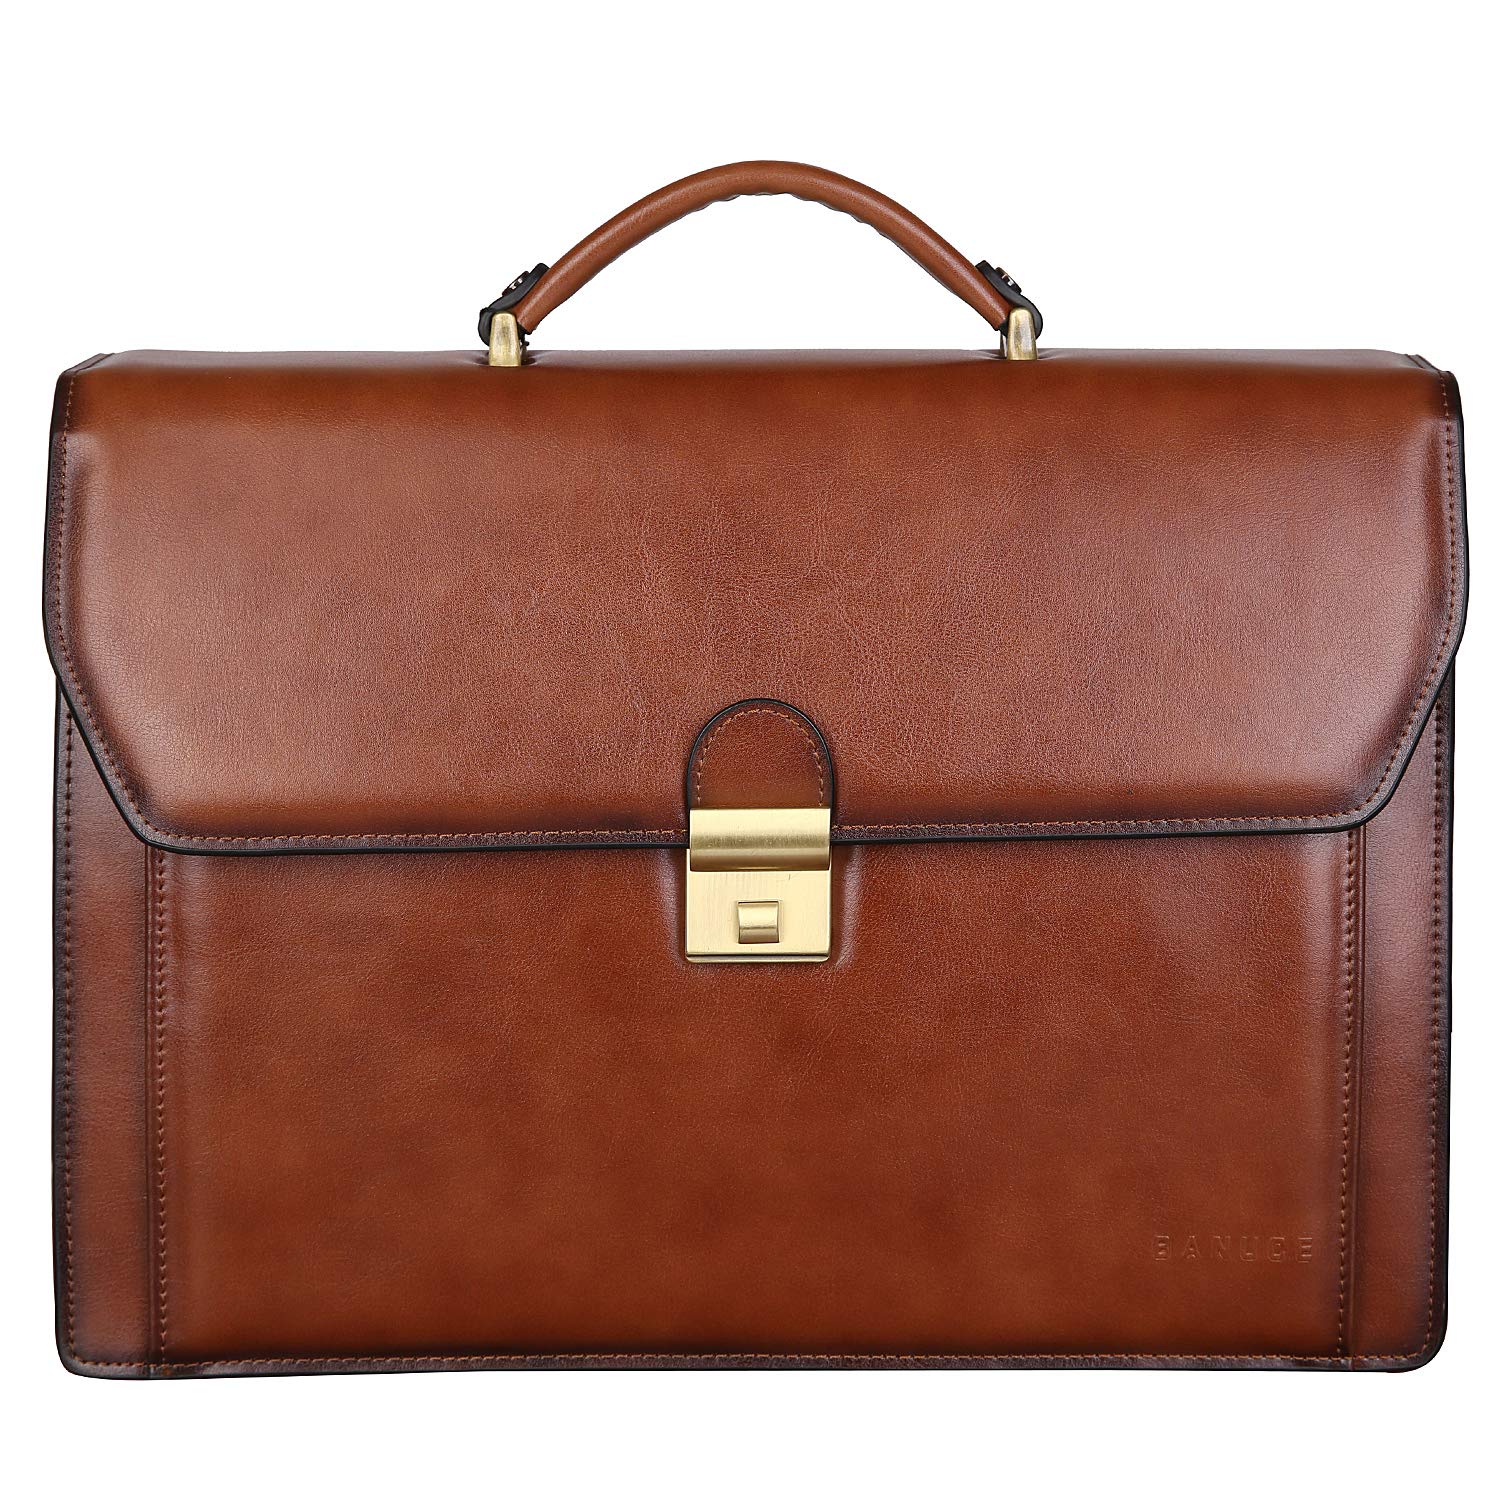 Buy Banuce Vintage Leather Briefcase for Men with Lock Attache Case 14 ...